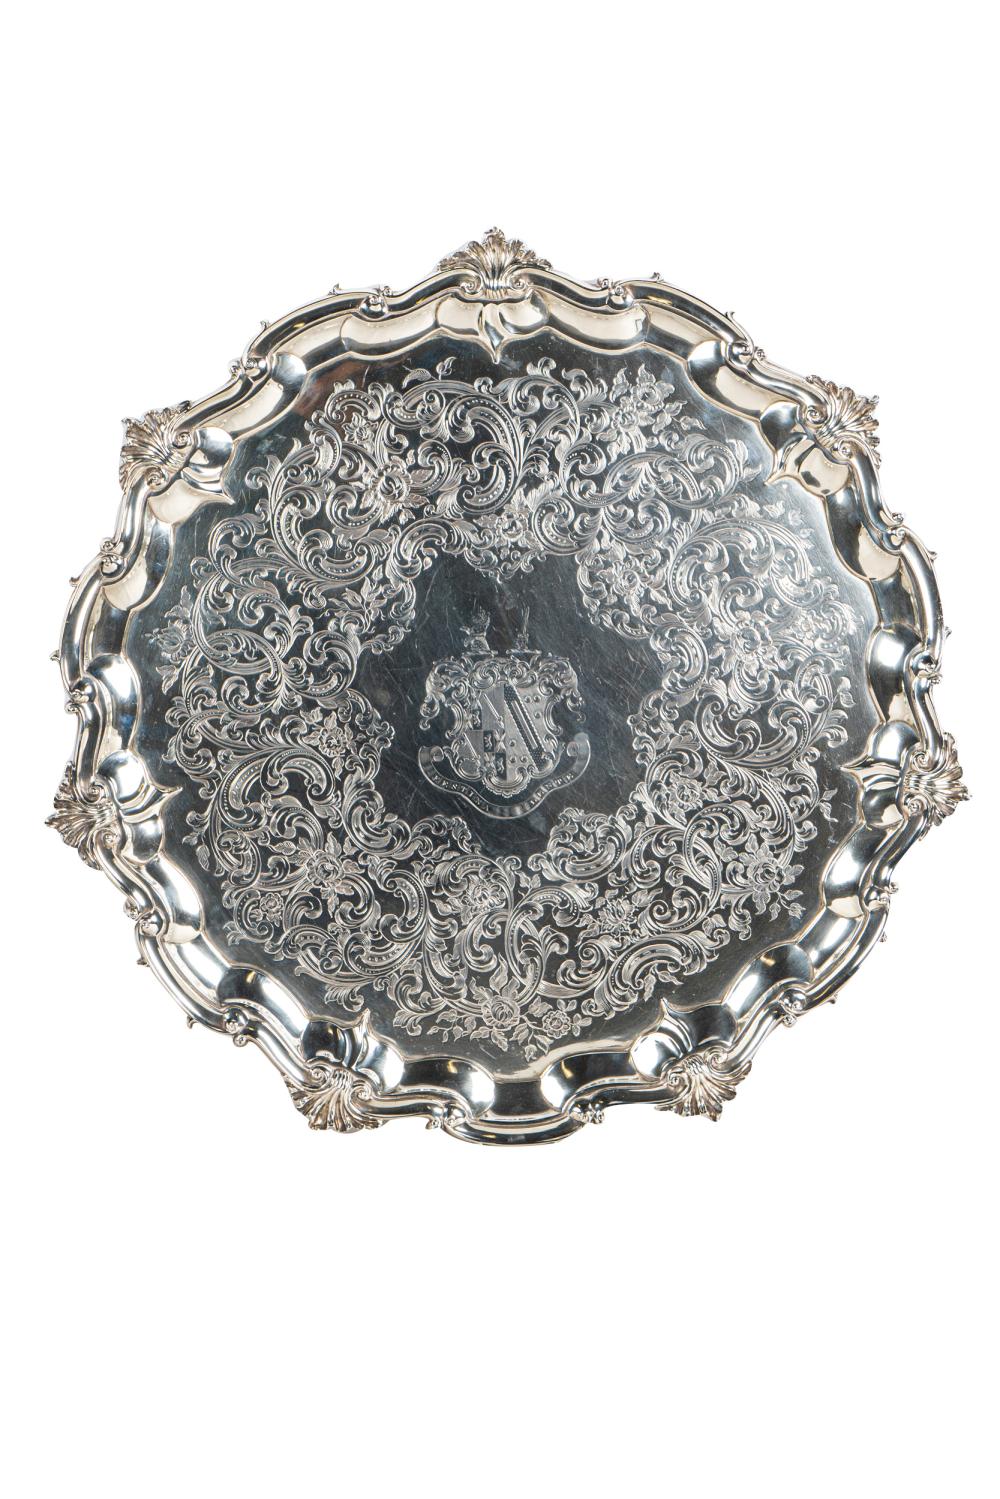 VICTORIAN SILVER FOOTED SALVER1843,